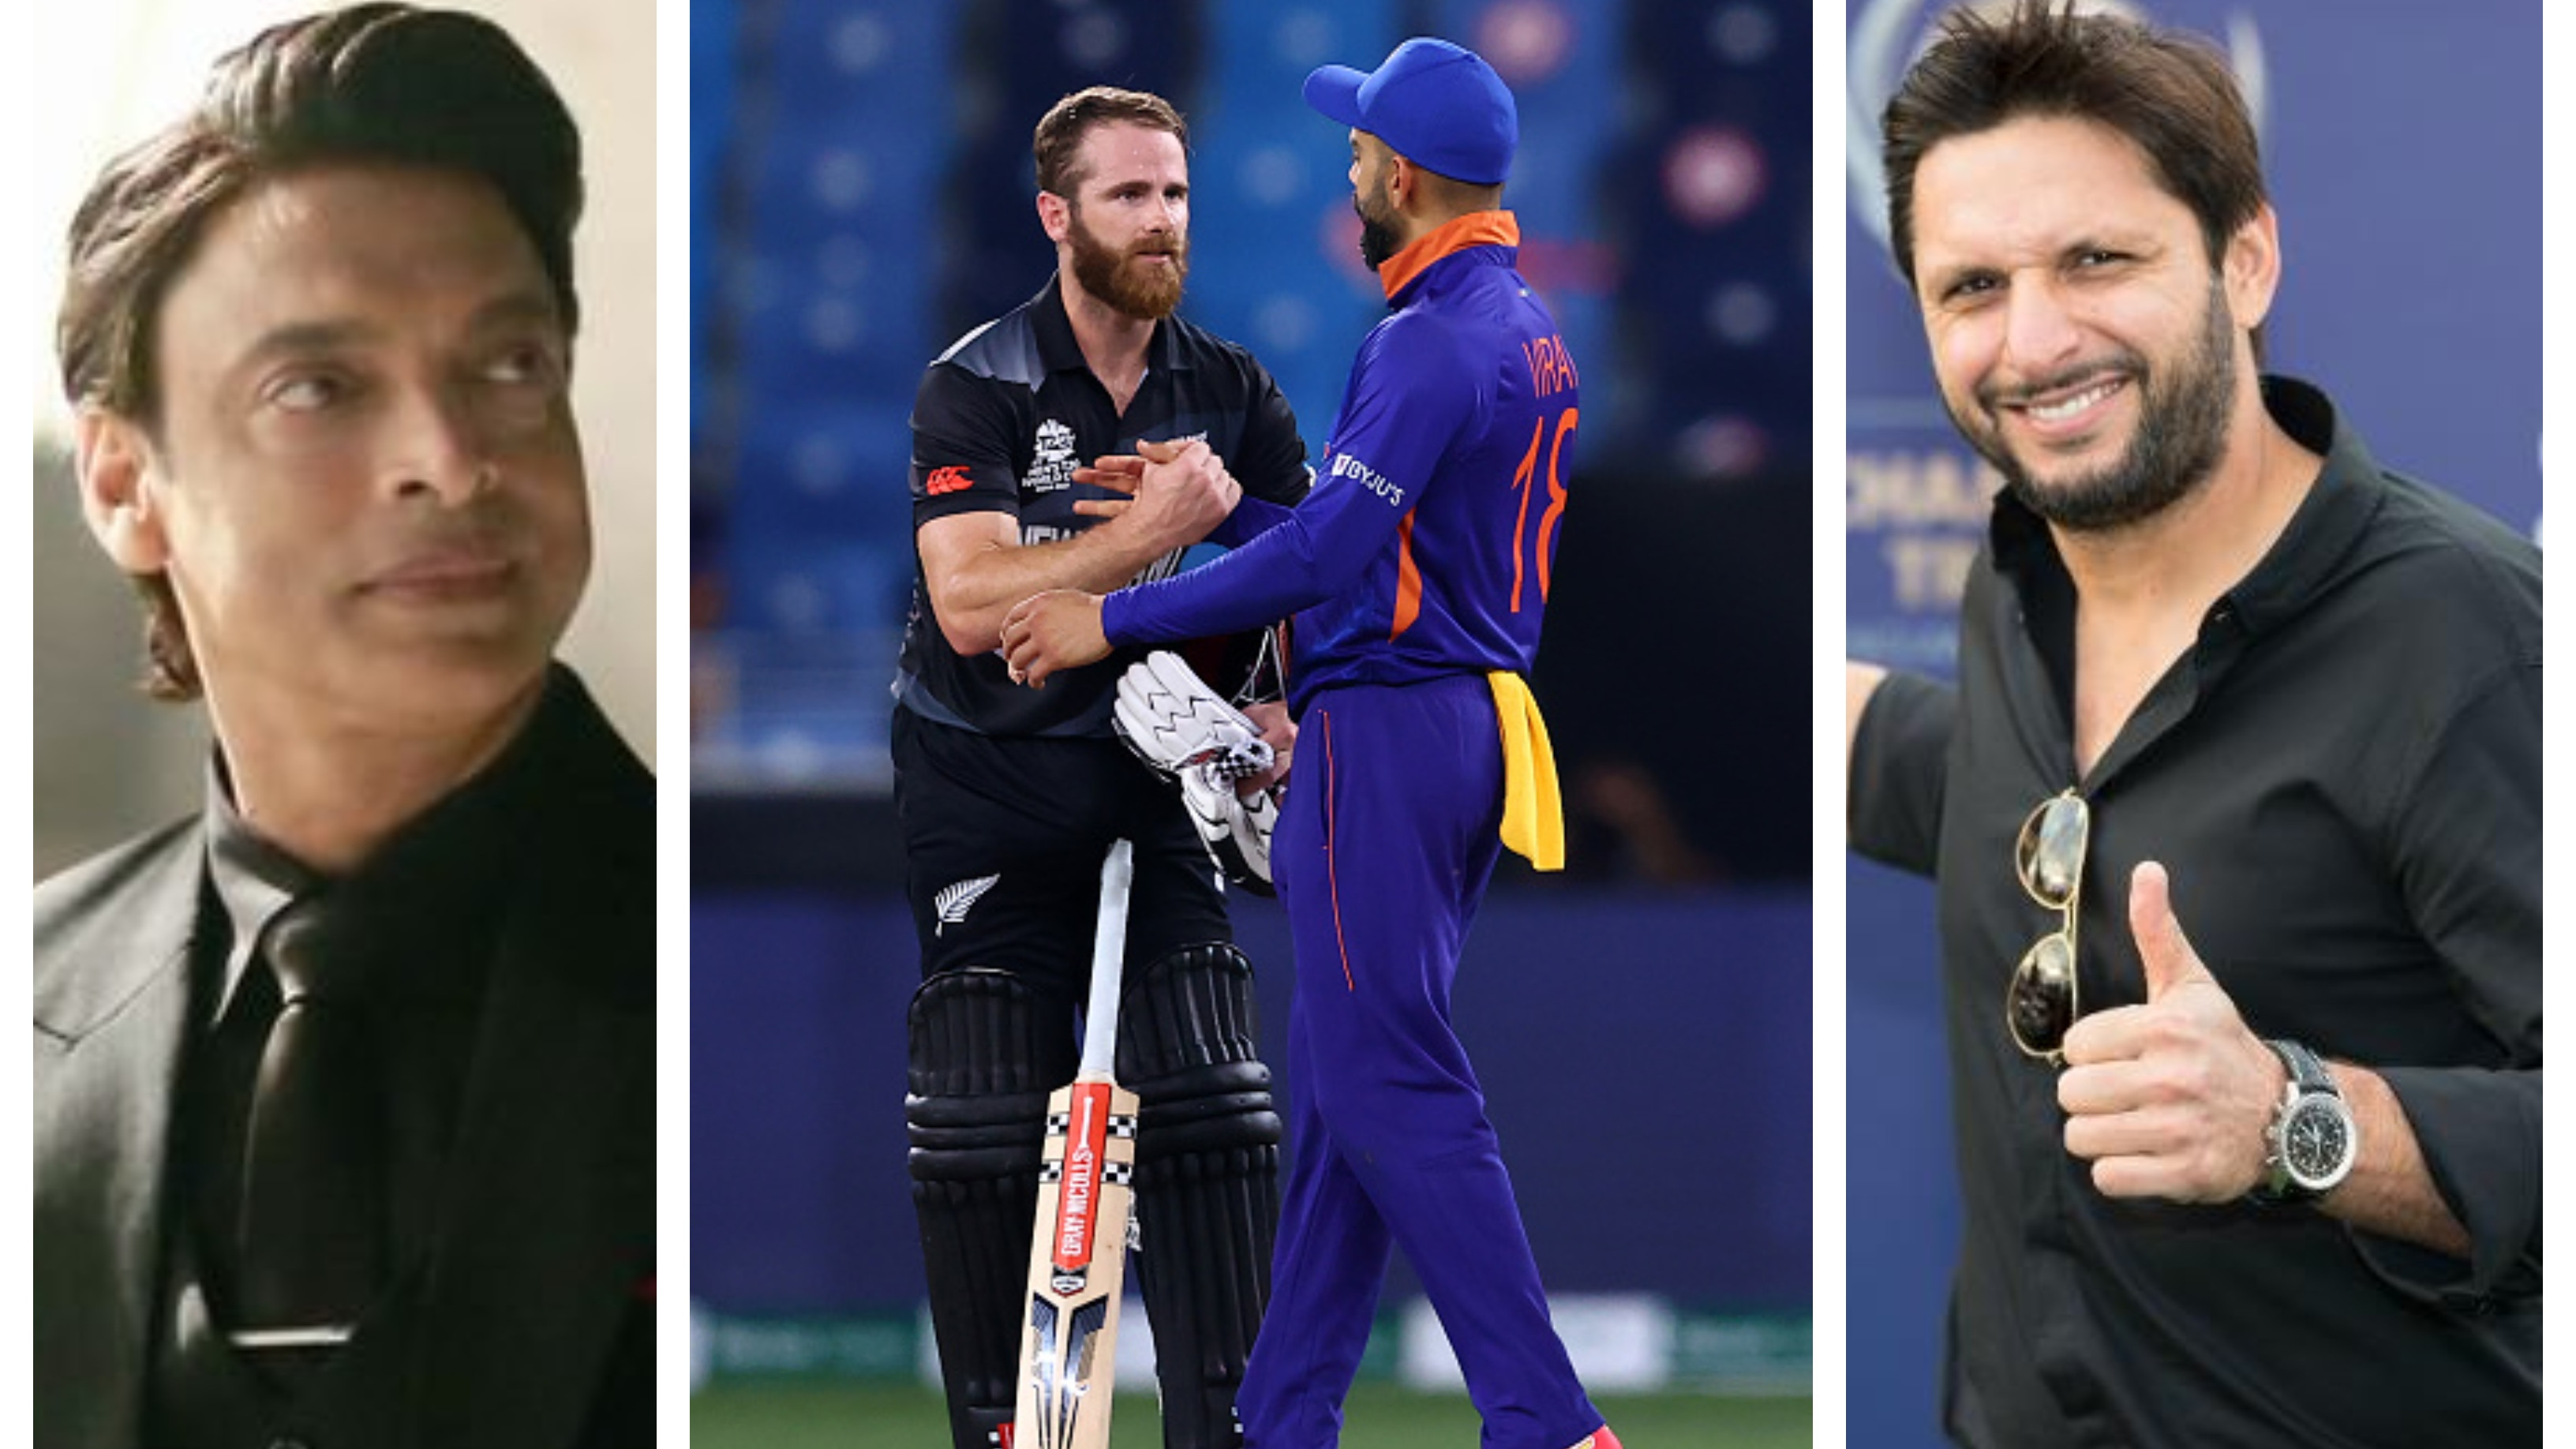 T20 World Cup 2021: Cricket fraternity reacts to India’s embarrassing 8-wicket loss to New Zealand